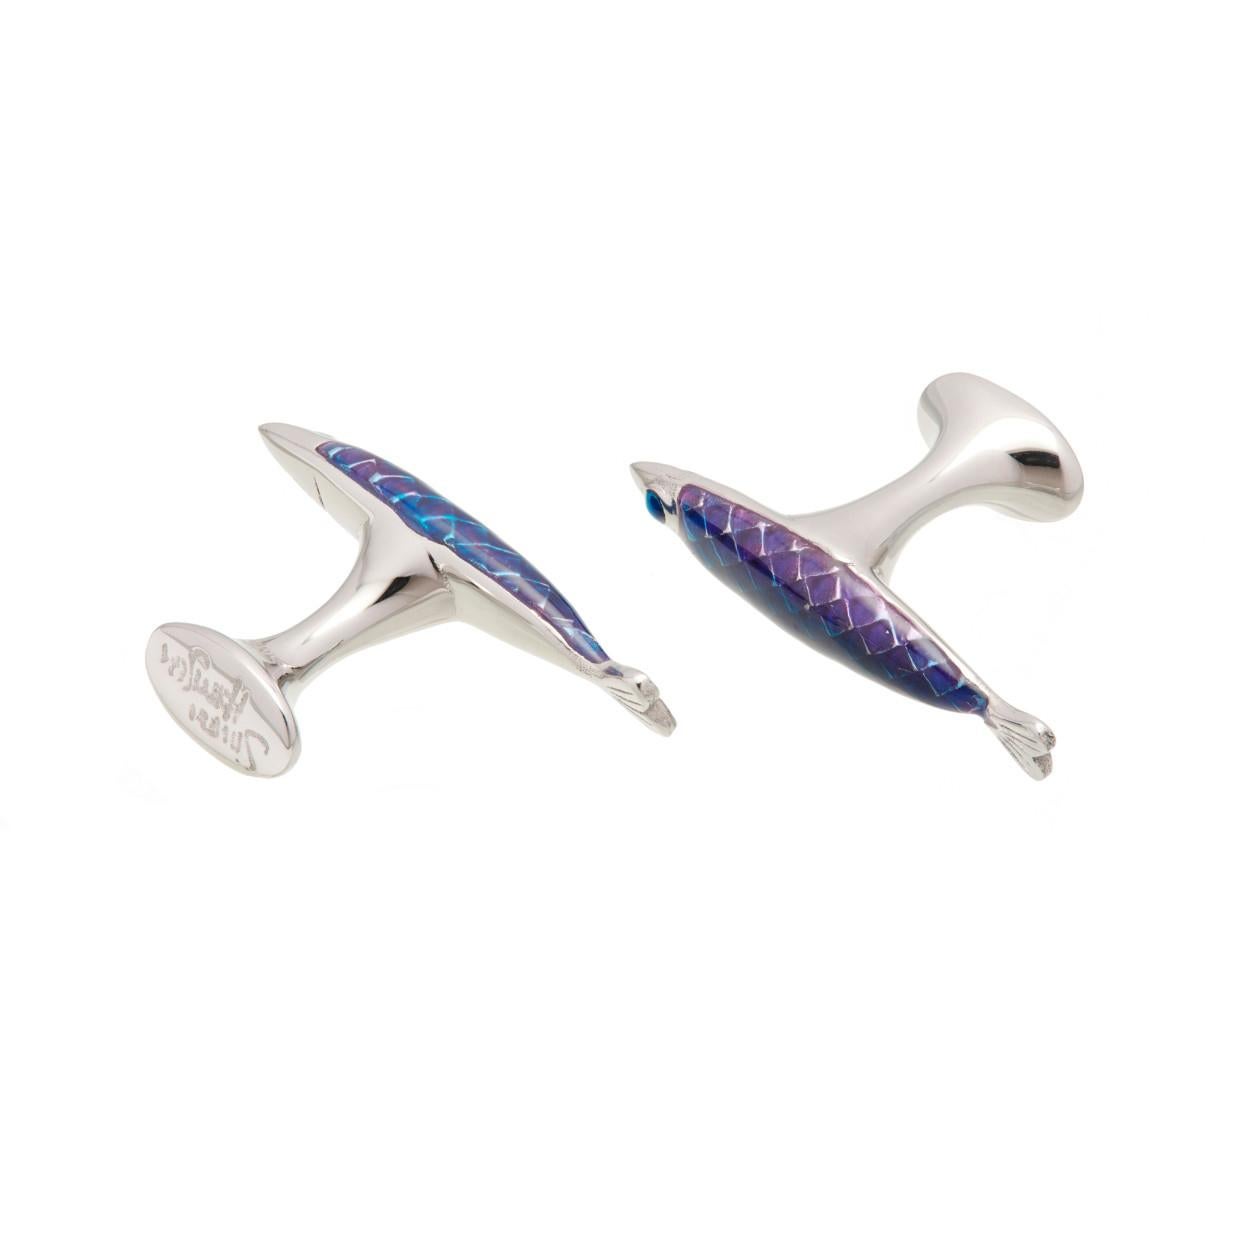 Enamelled fish in iridescent hues features humorous undercurrents: an illustrative detailed skeleton on the back. The Electra collection embodies power and strength named after the wife of the ancient Greek Sea God Thaumas, Electra presided over the